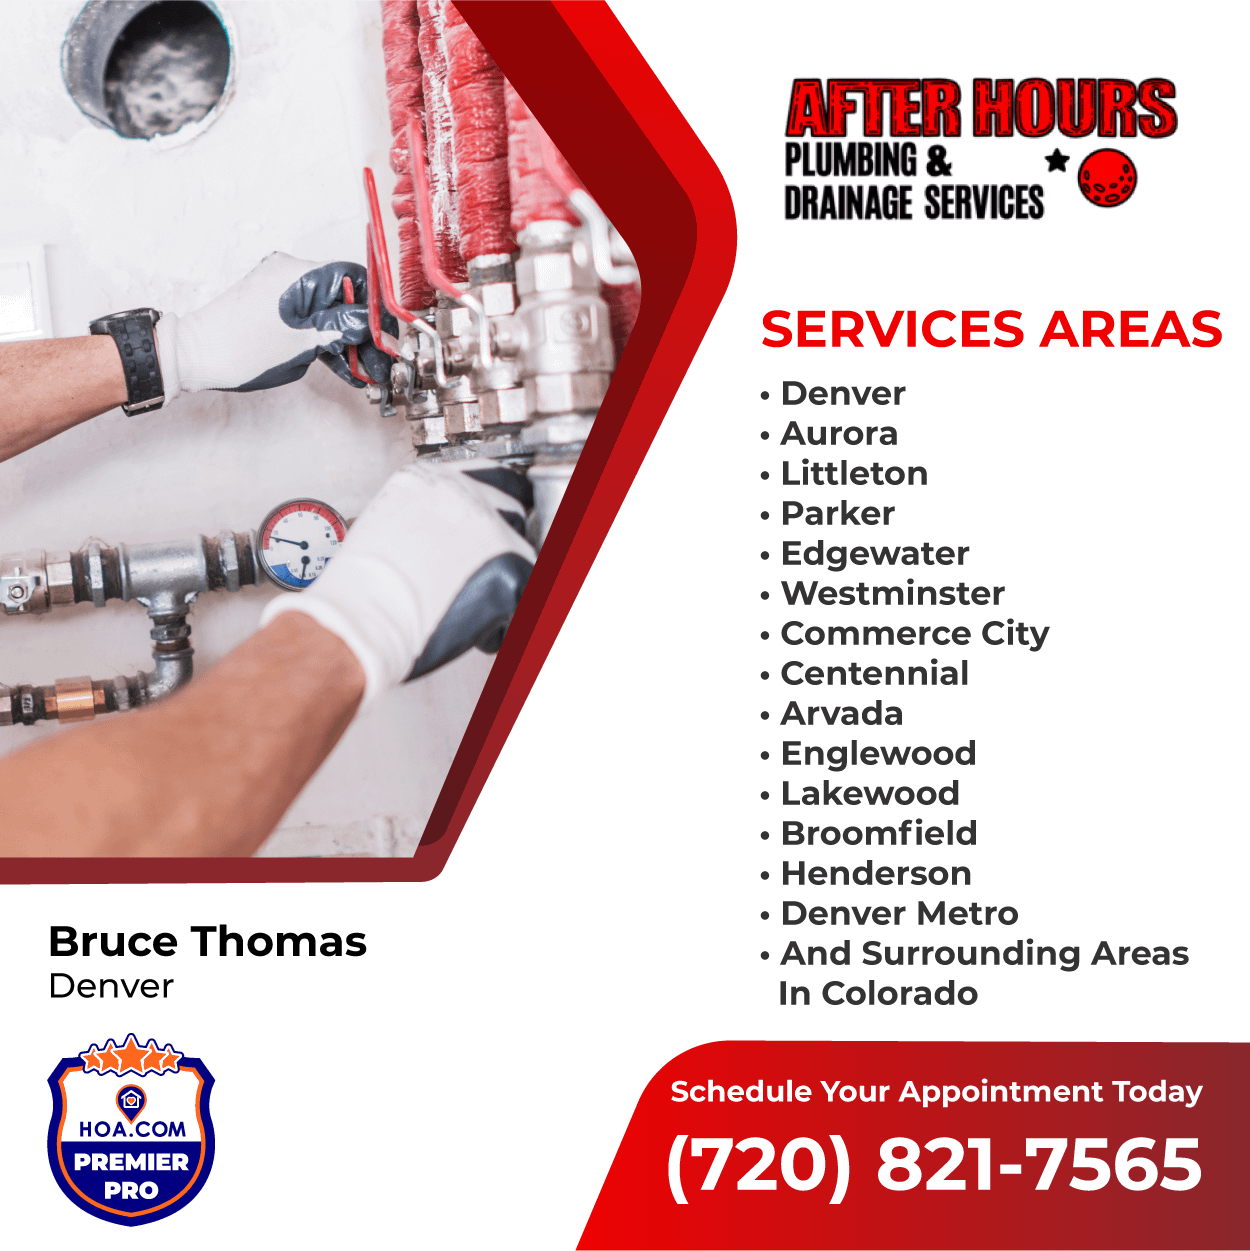 After Hours PLumbing Service Areas